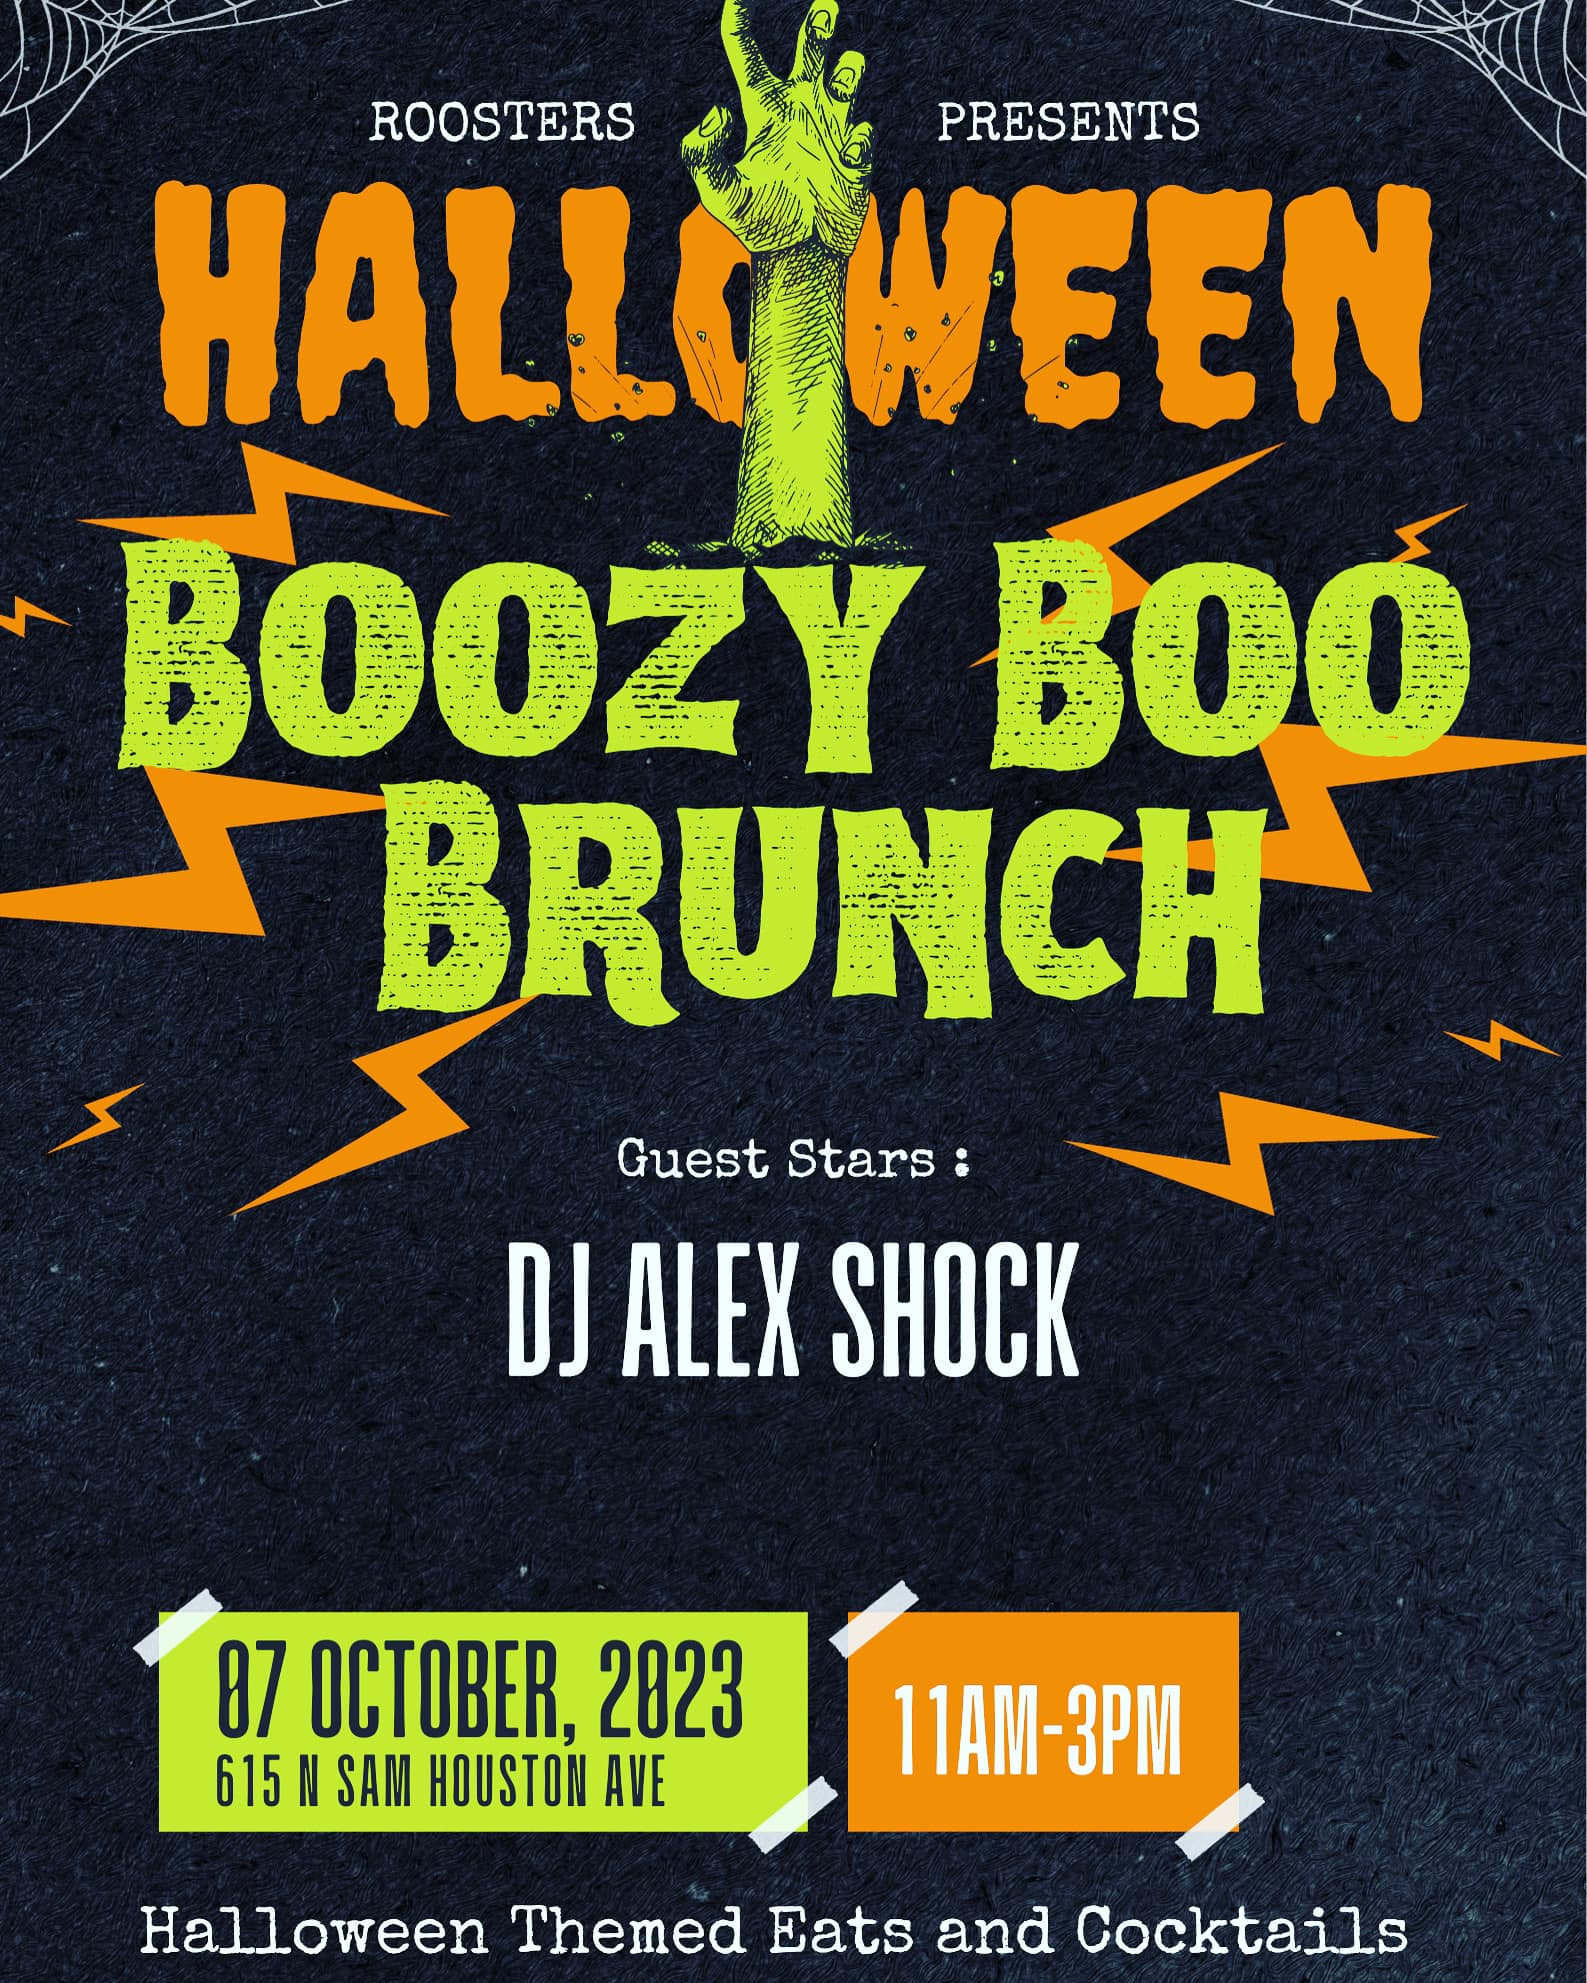 Halloween Boozy Boo Brunch at Roosters